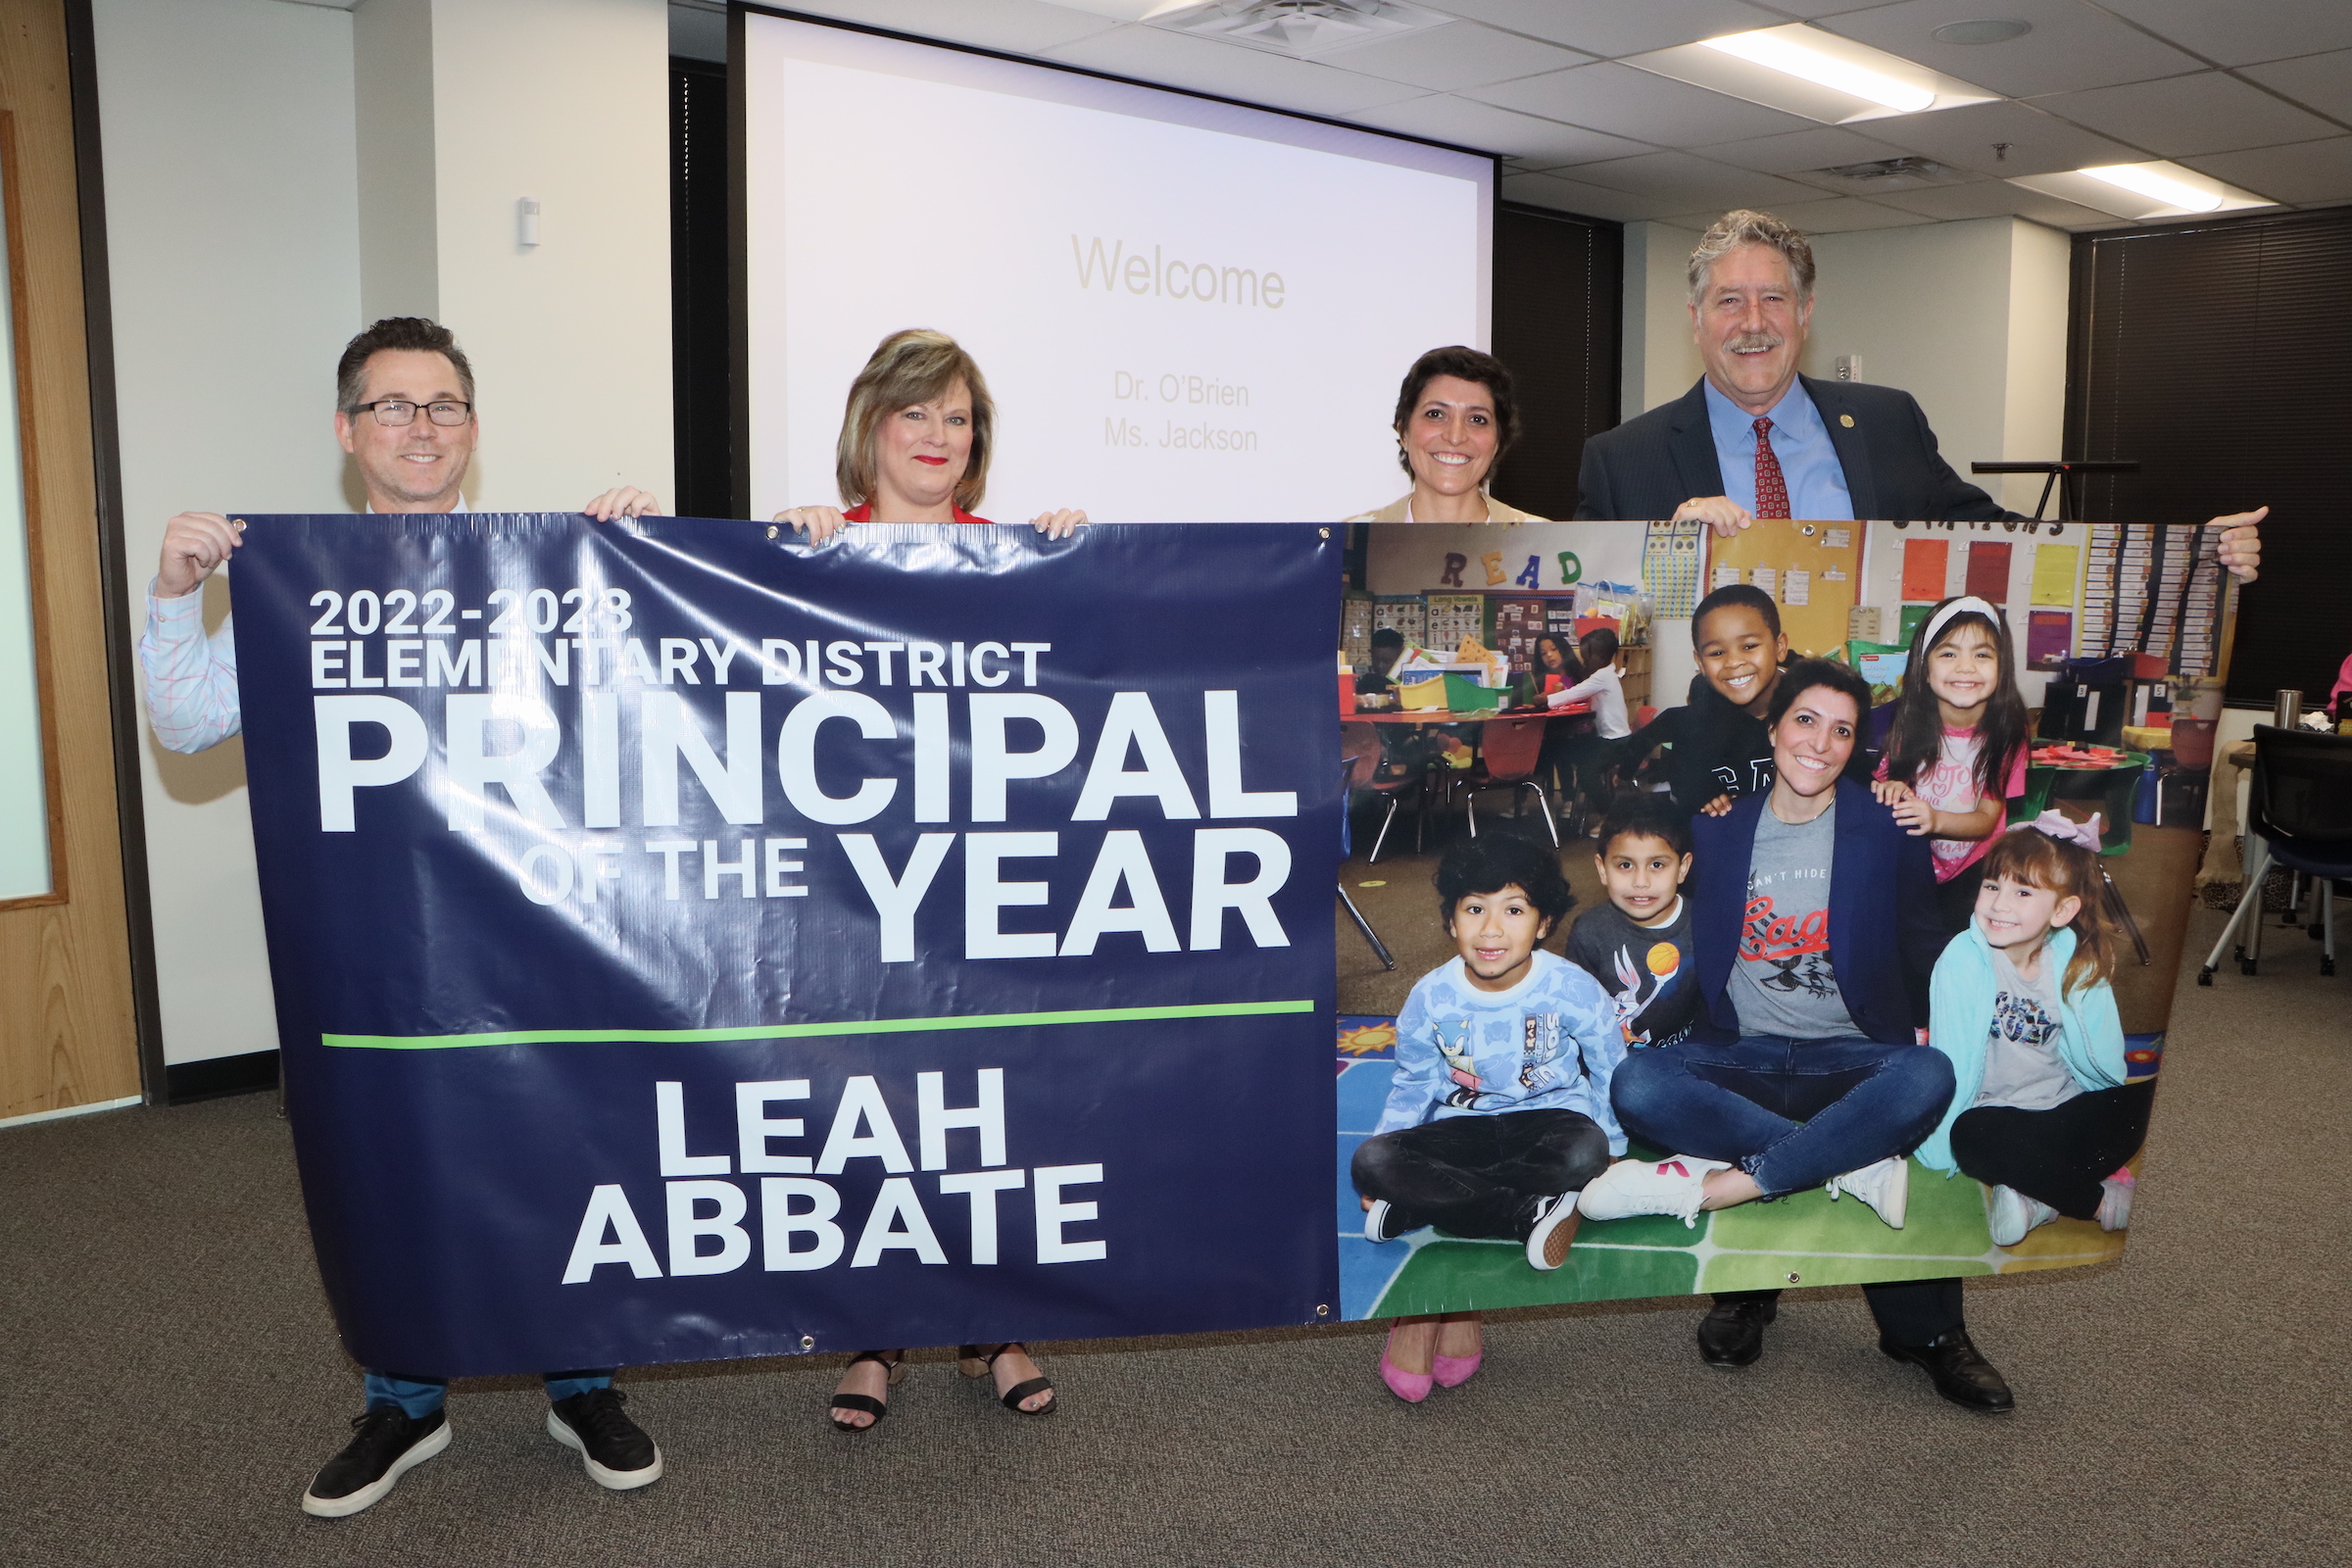 Leah Abbot holds principal of the year banner with district administrators